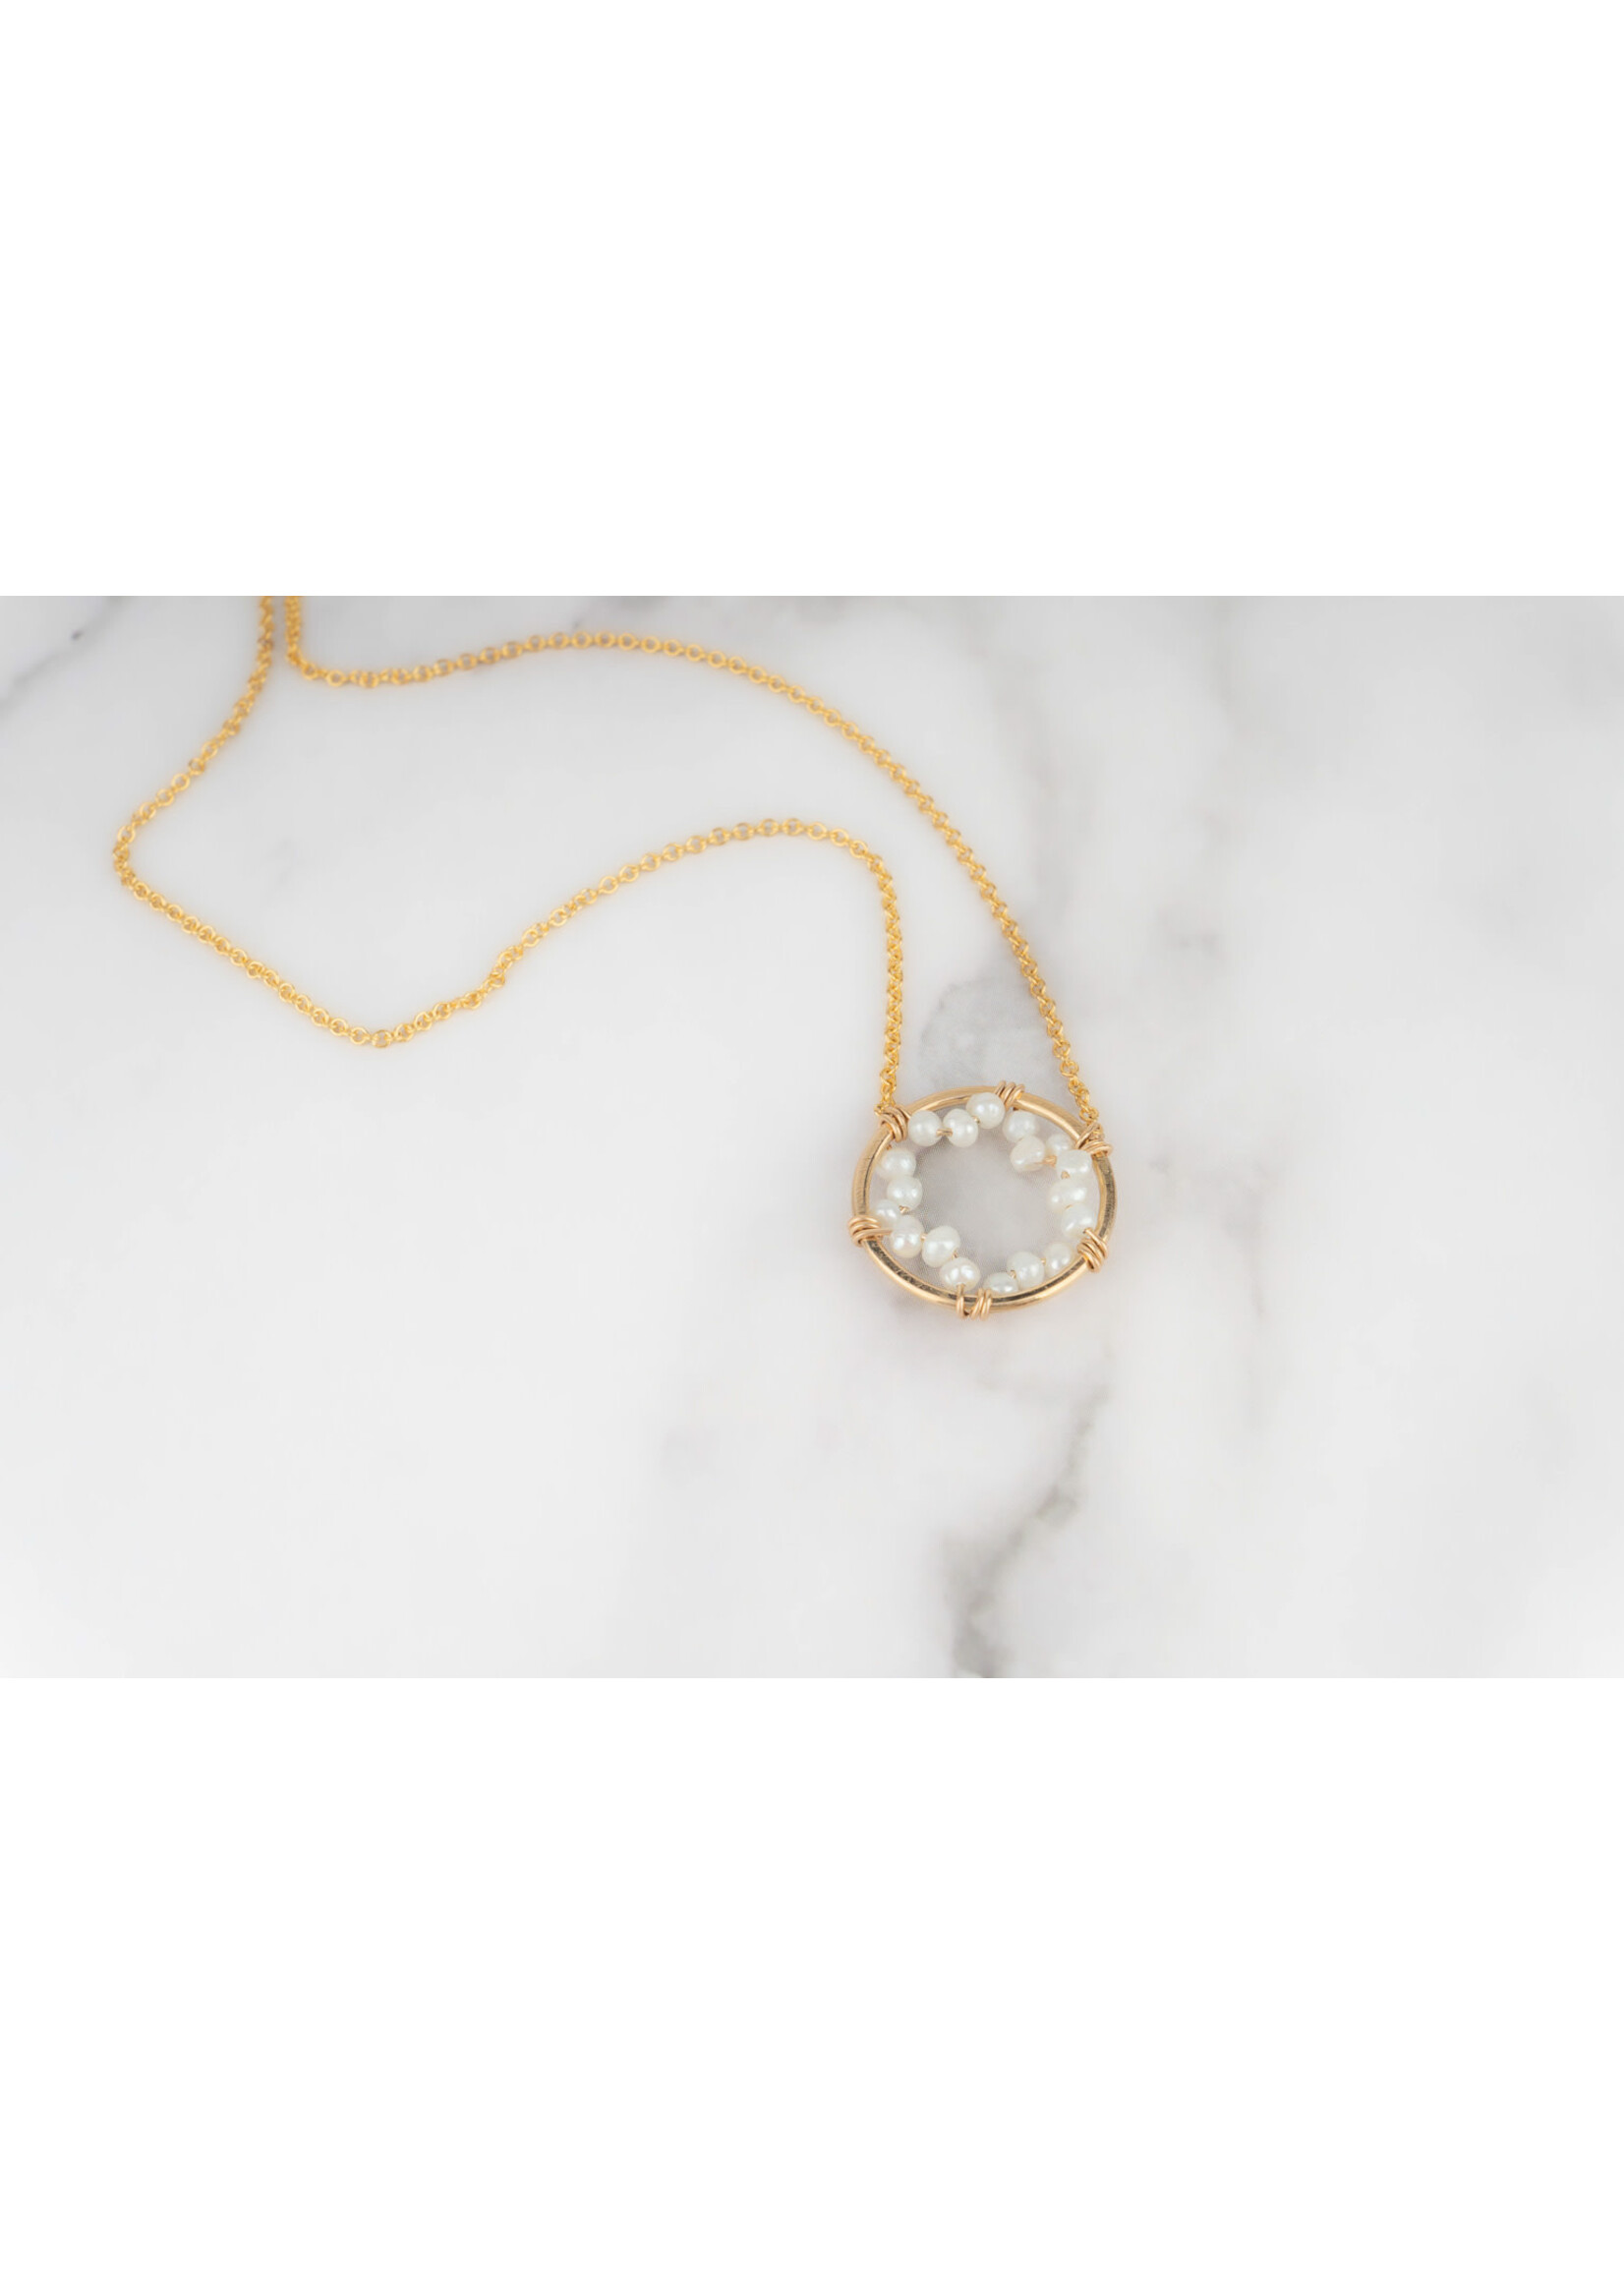 Cristy's Jewelry Designs Gold Scalloped Hoop Necklace-Pearl